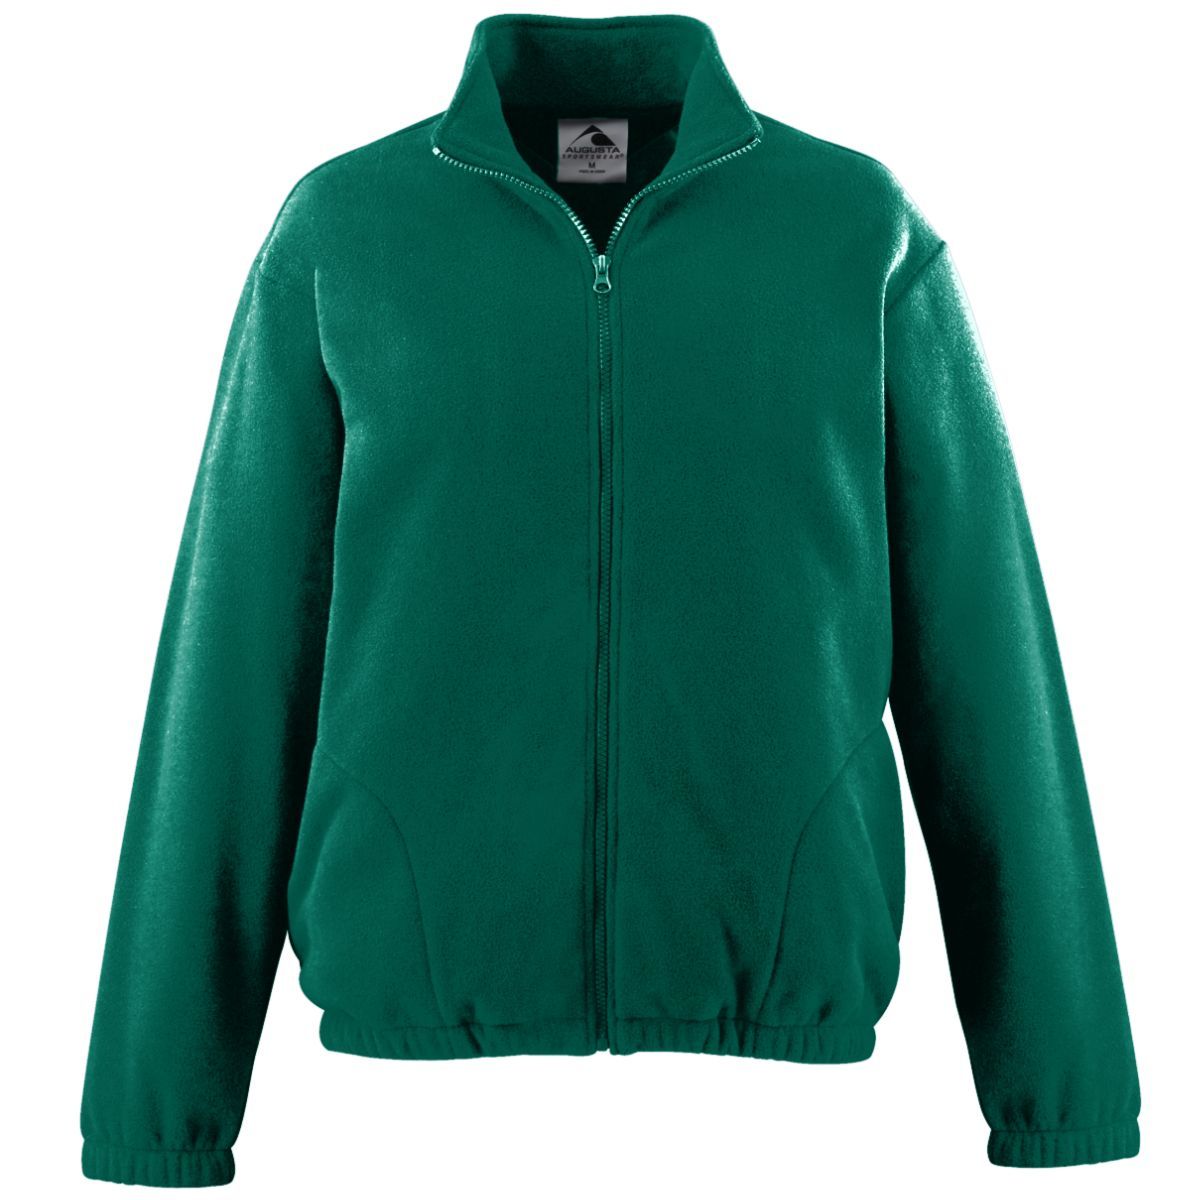 Augusta Sportswear Youth Chill Fleece Full Zip Jacket in Dark Green  -Part of the Youth, Youth-Jacket, Augusta-Products, Outerwear product lines at KanaleyCreations.com